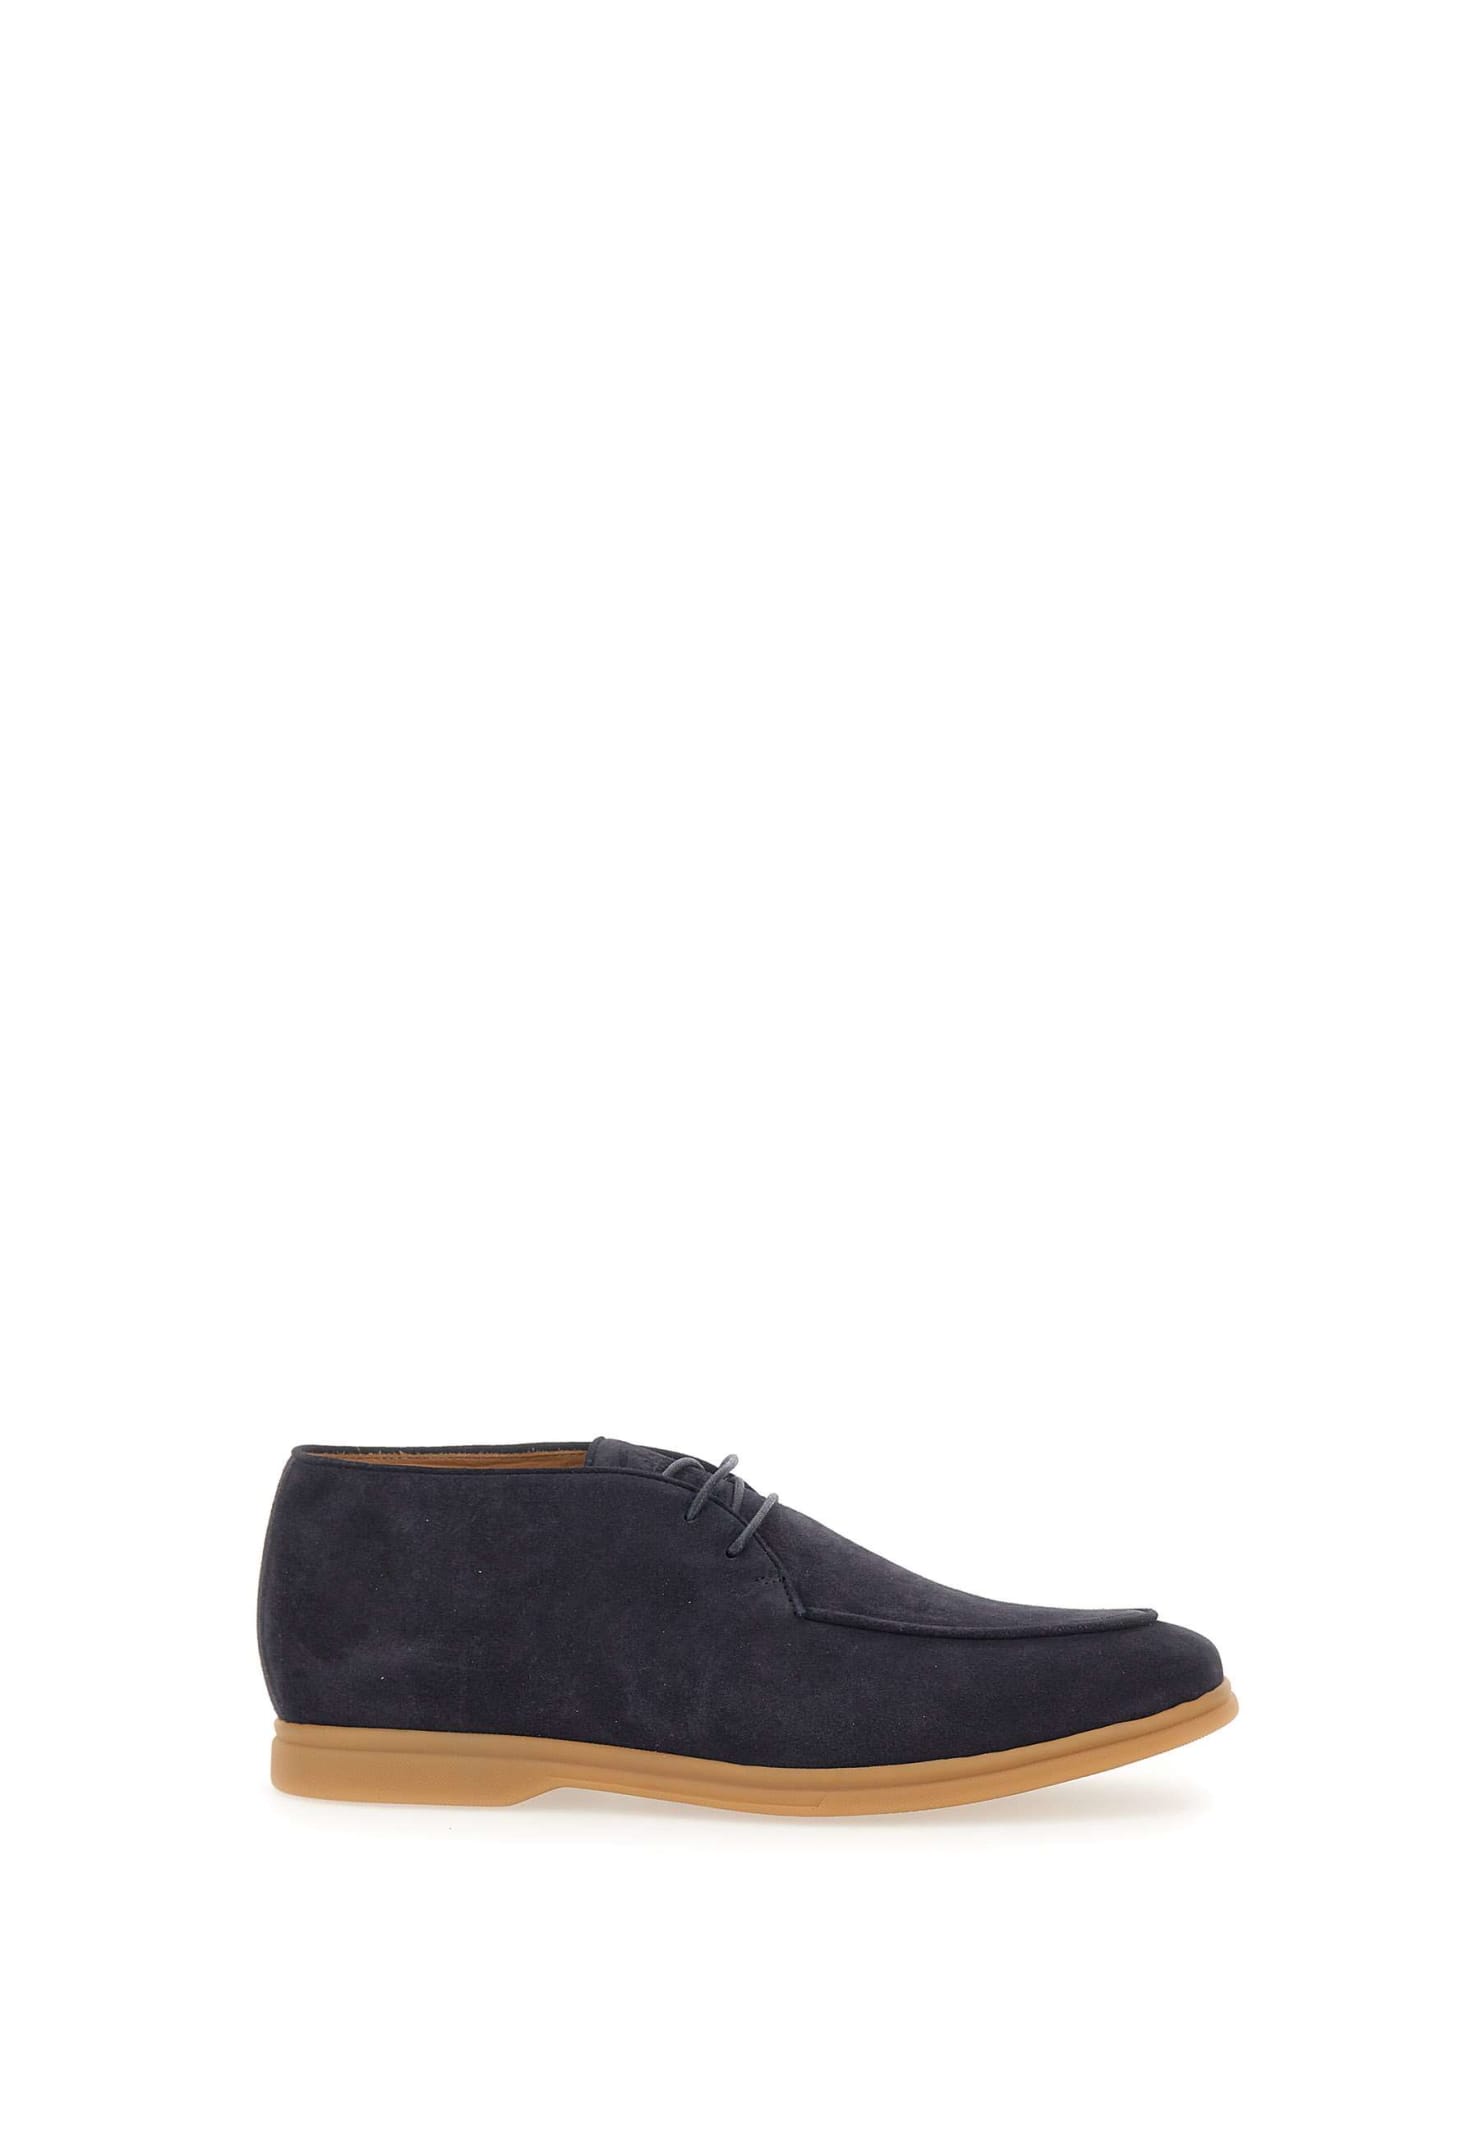 ELEVENTY SUEDE LACE-UP SHOES